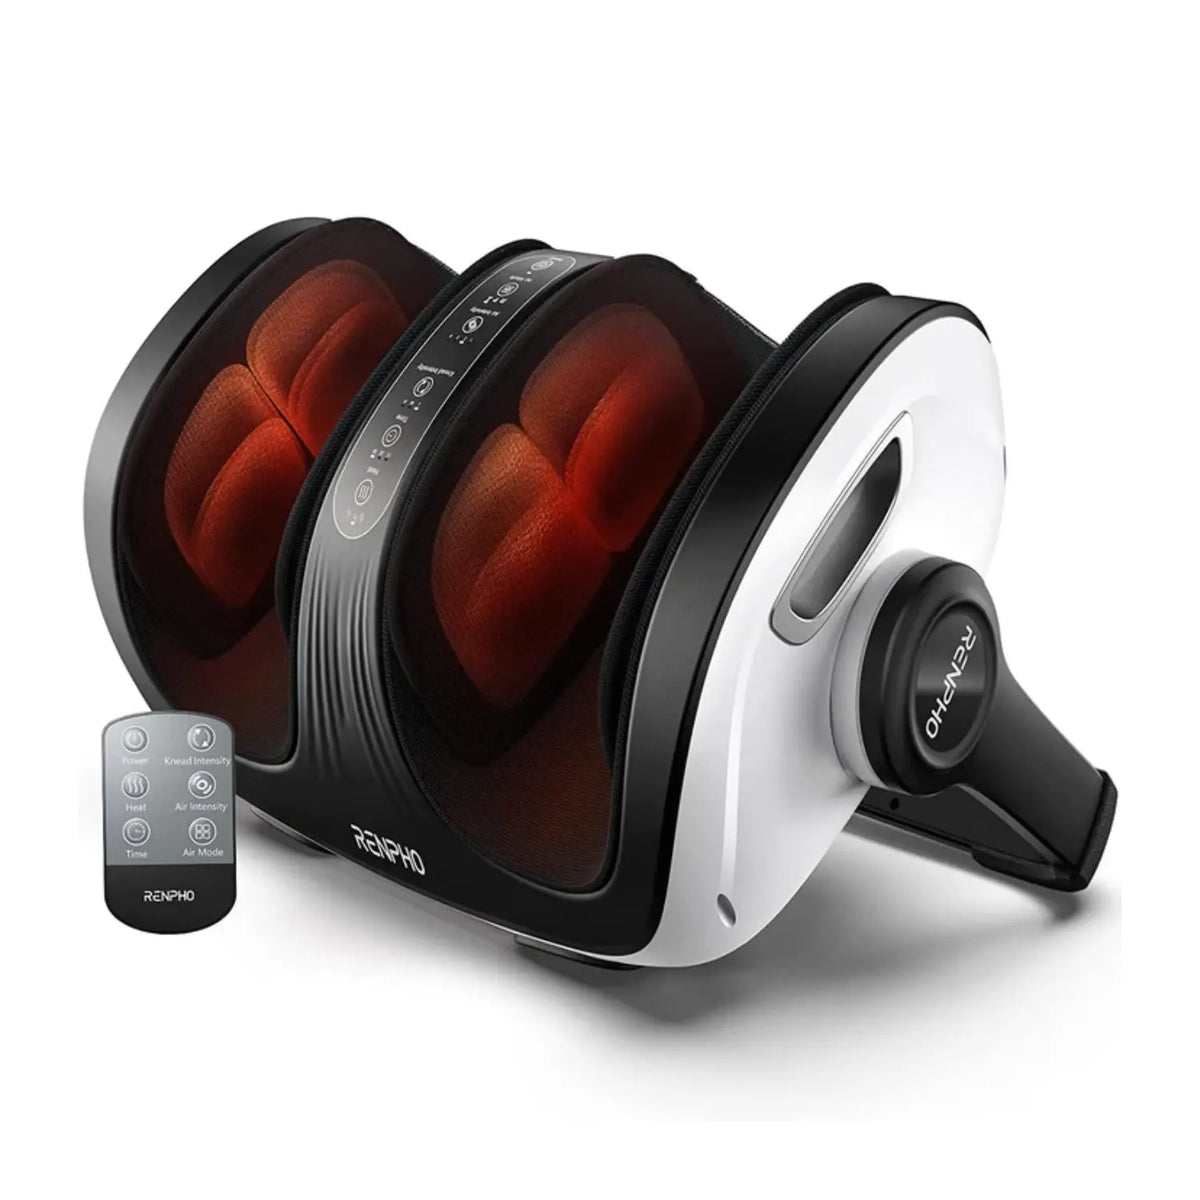 The image features a Renpho EU Shiatsu Foot and Calf Massager in a sleek black and white design. It includes a handle on the side, a digital control panel on top, and appears to have adjustable heating functions. A remote control with various settings is shown alongside the massager.